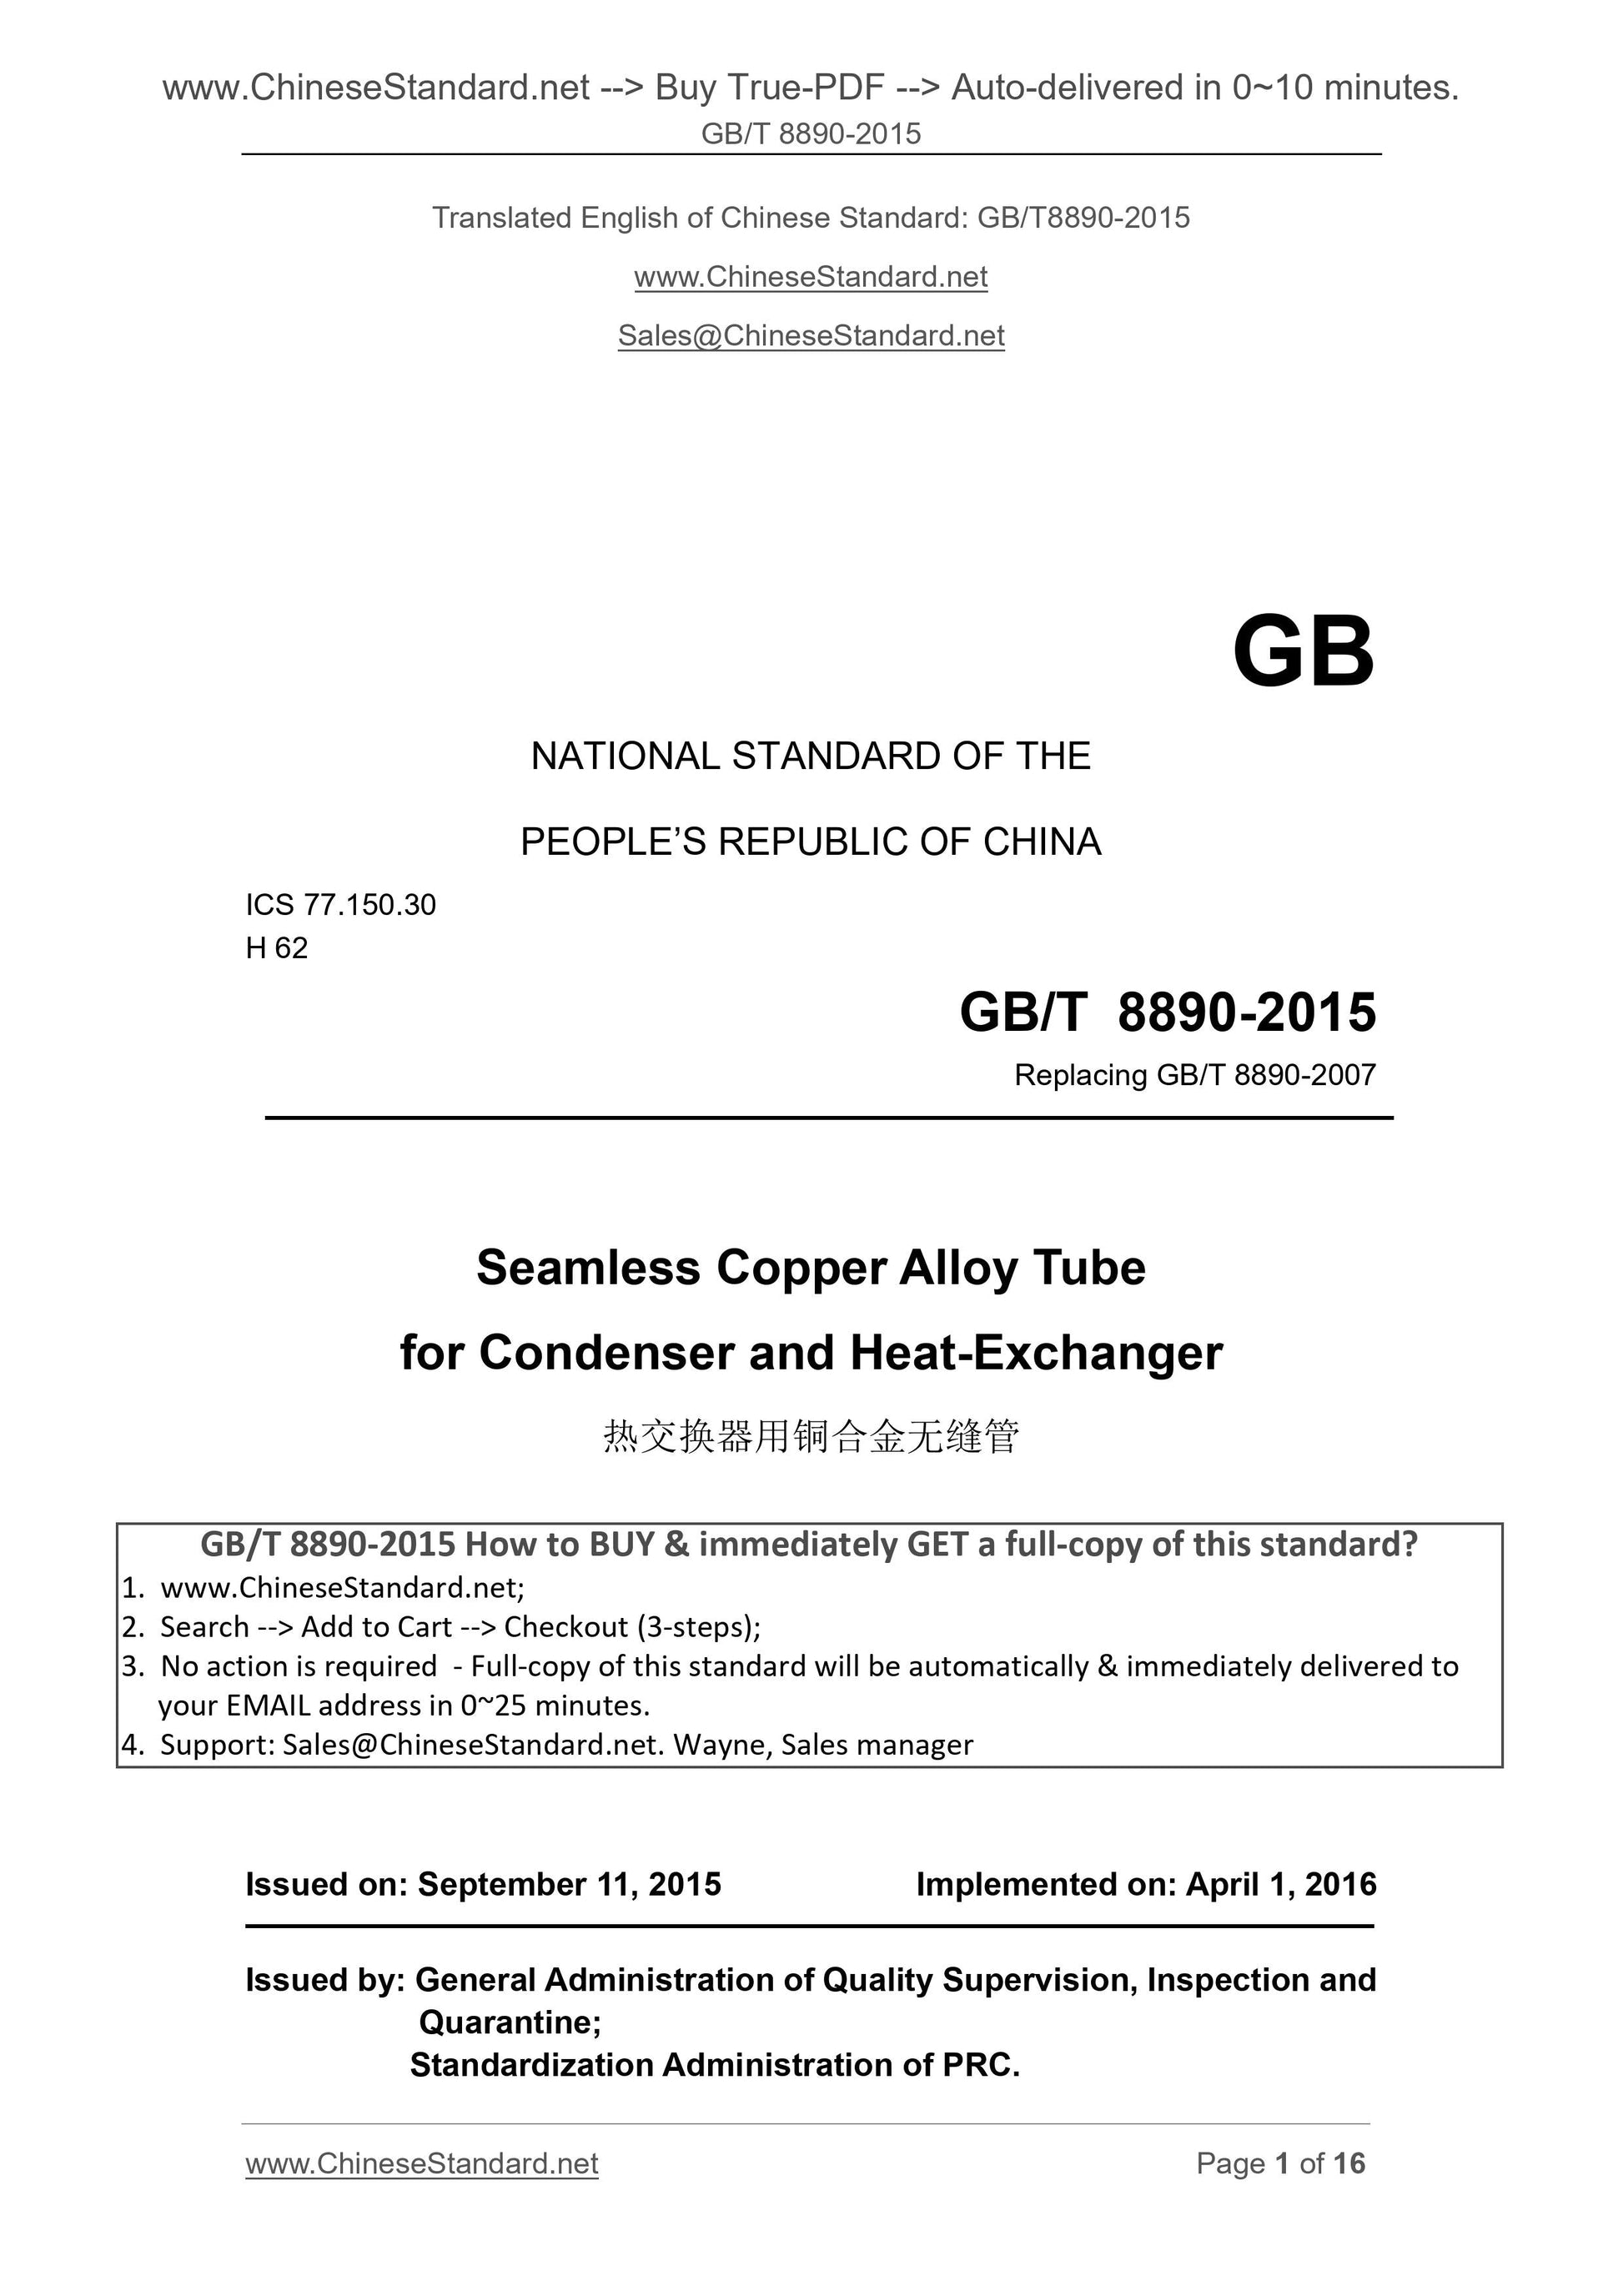 GB/T 8890-2015 Page 1